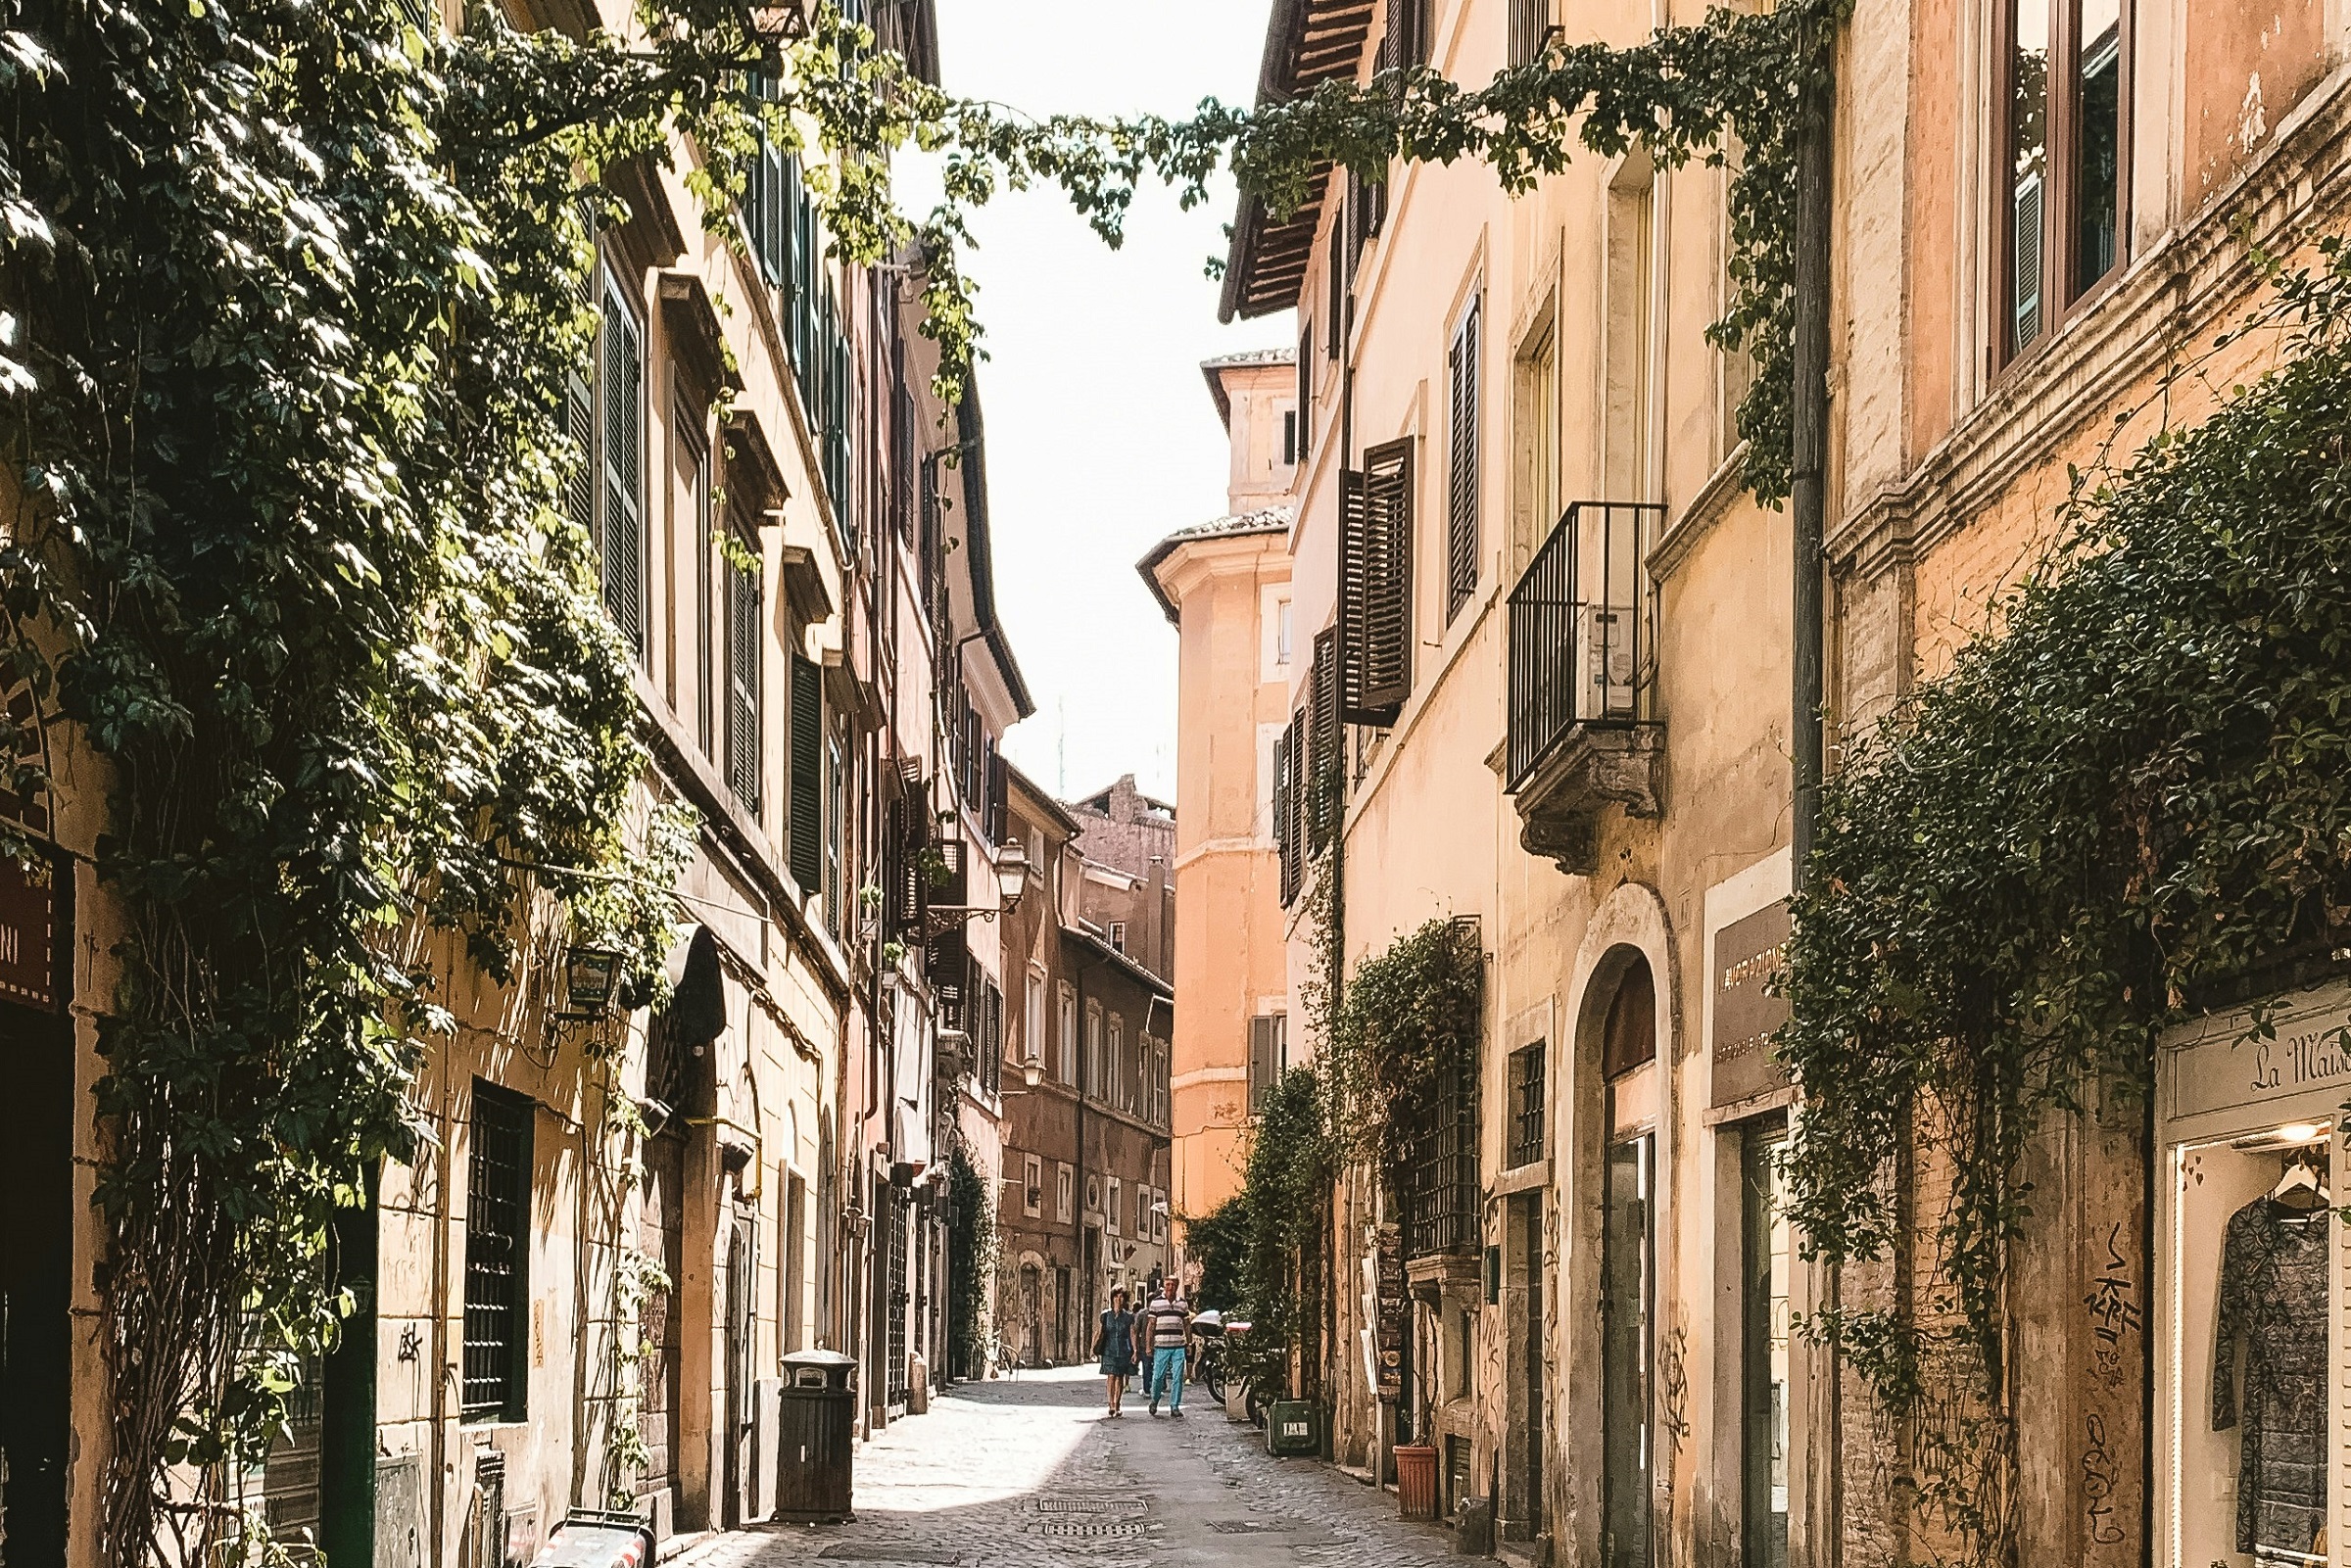 A street in Rome, Italy.